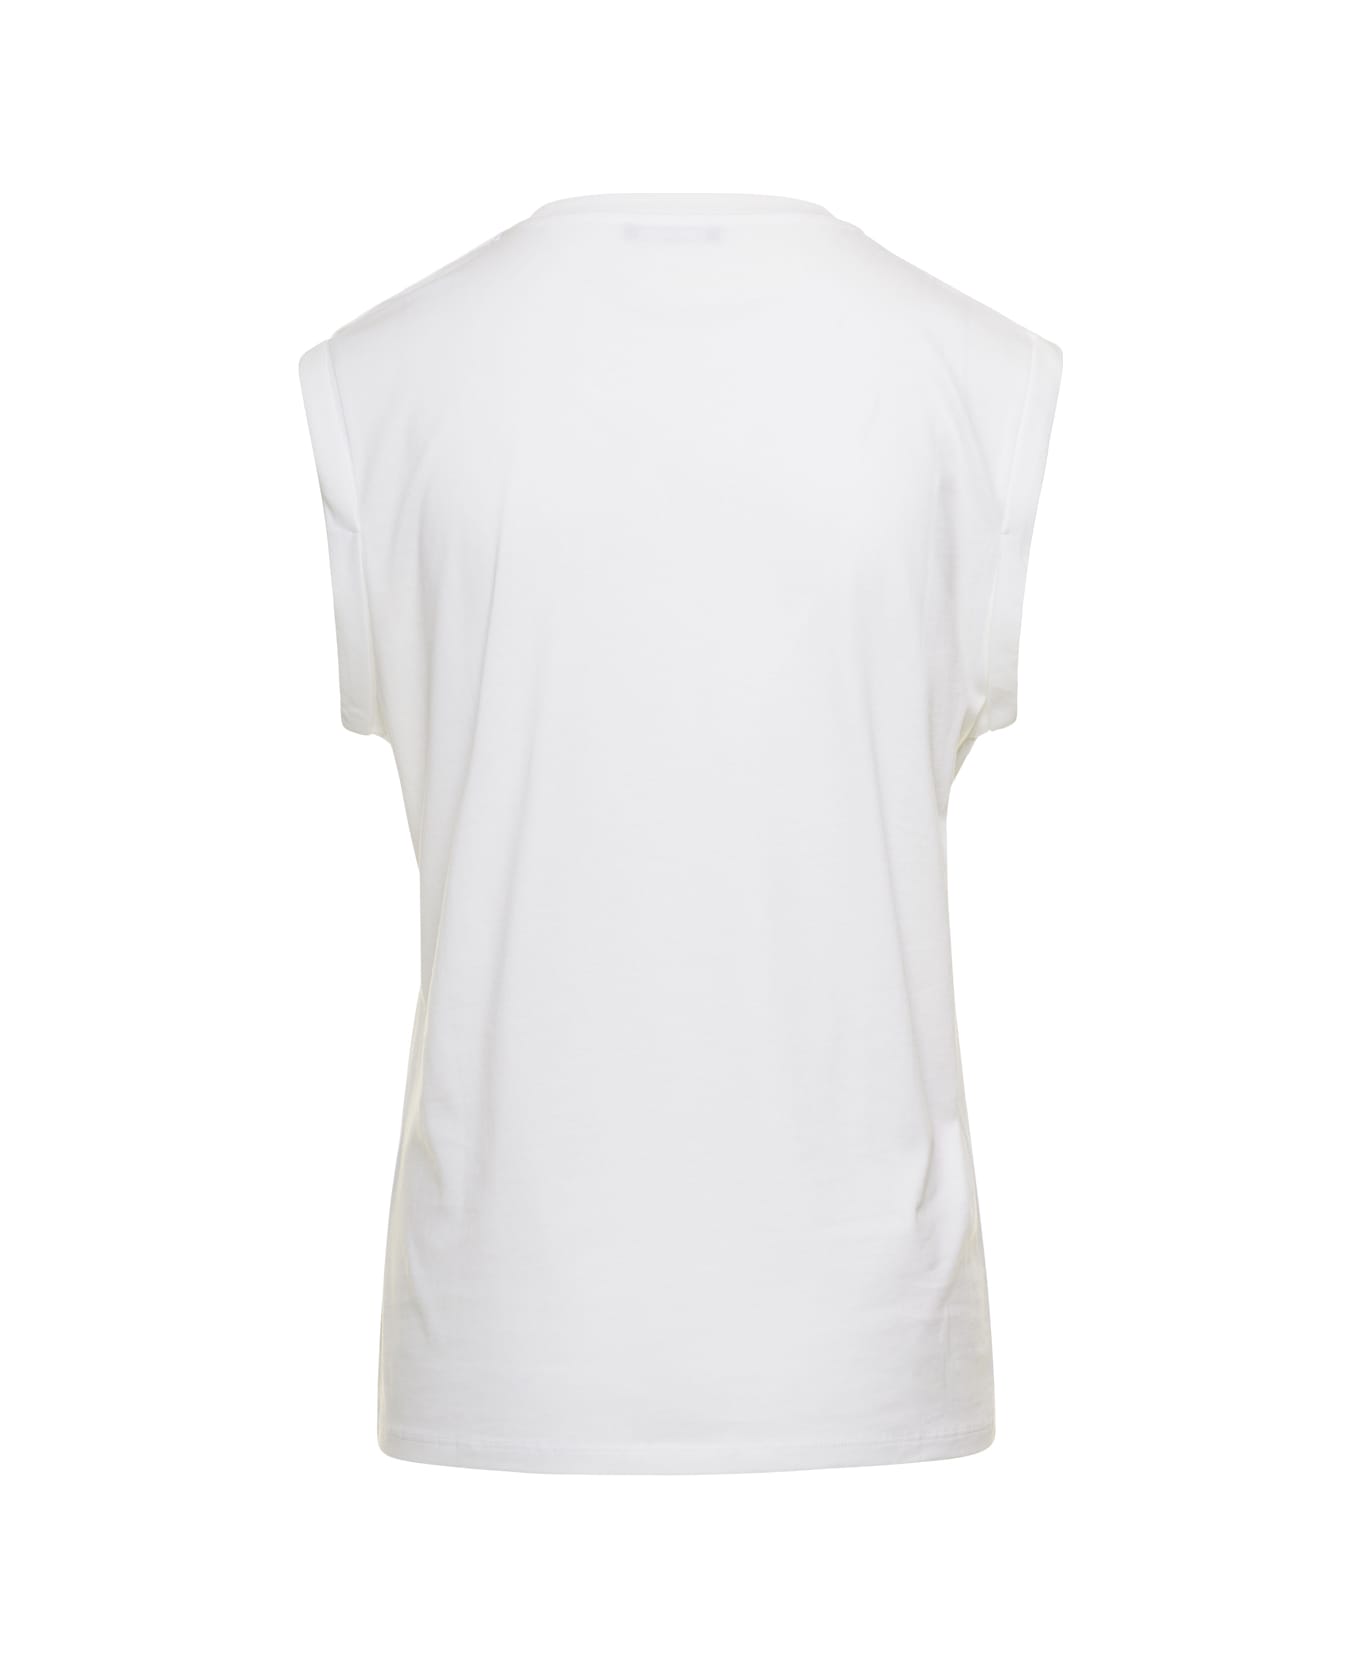 Balmain White Tank Top With Contrasting Lettering Print And Jewel Buttons In Cotton Donna Balmain - White